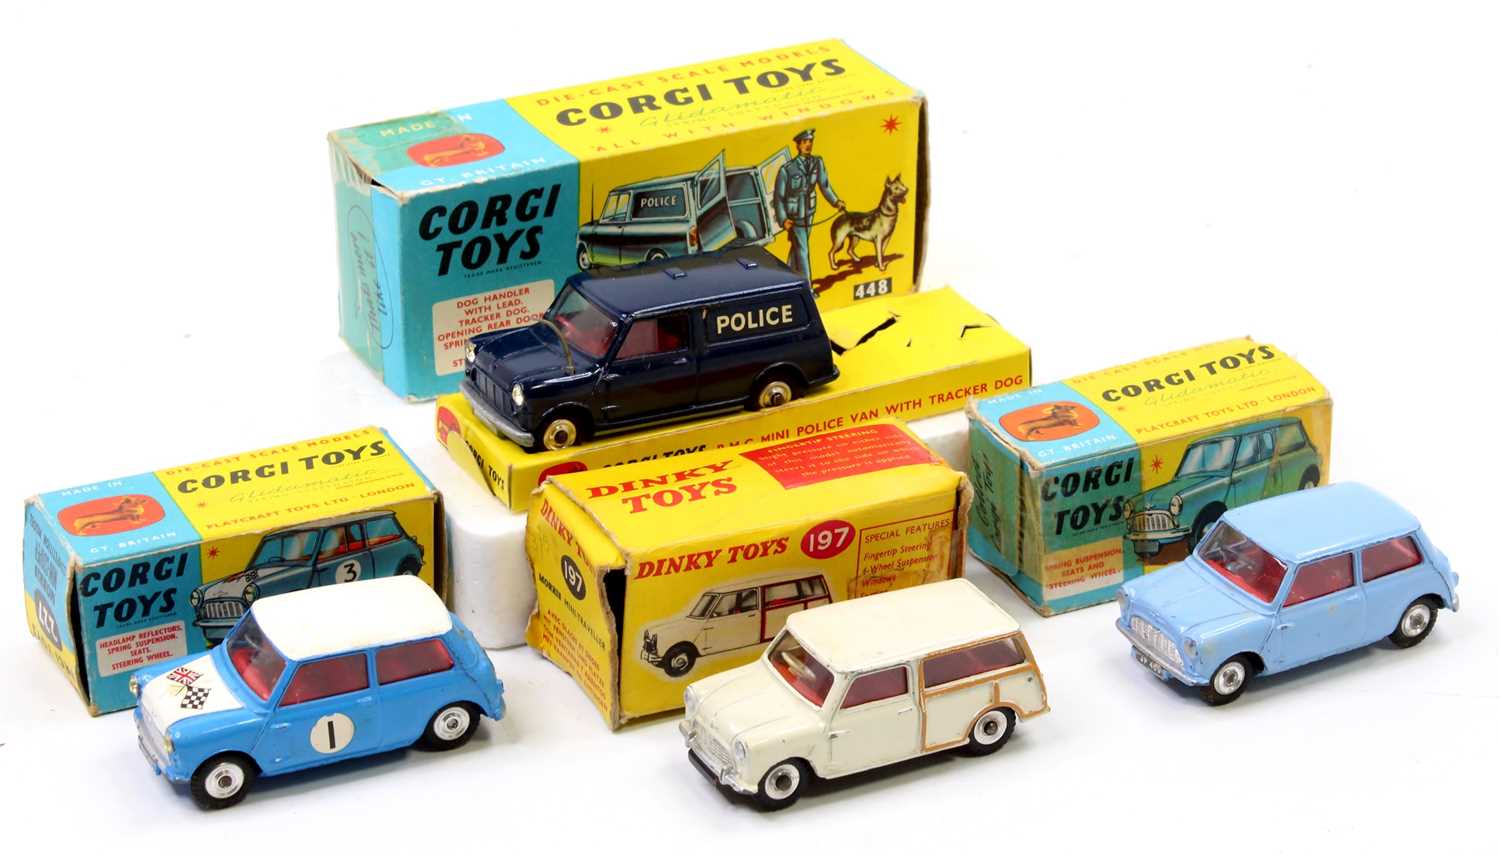 Corgi and Dinky Toys - Potteries Auctions